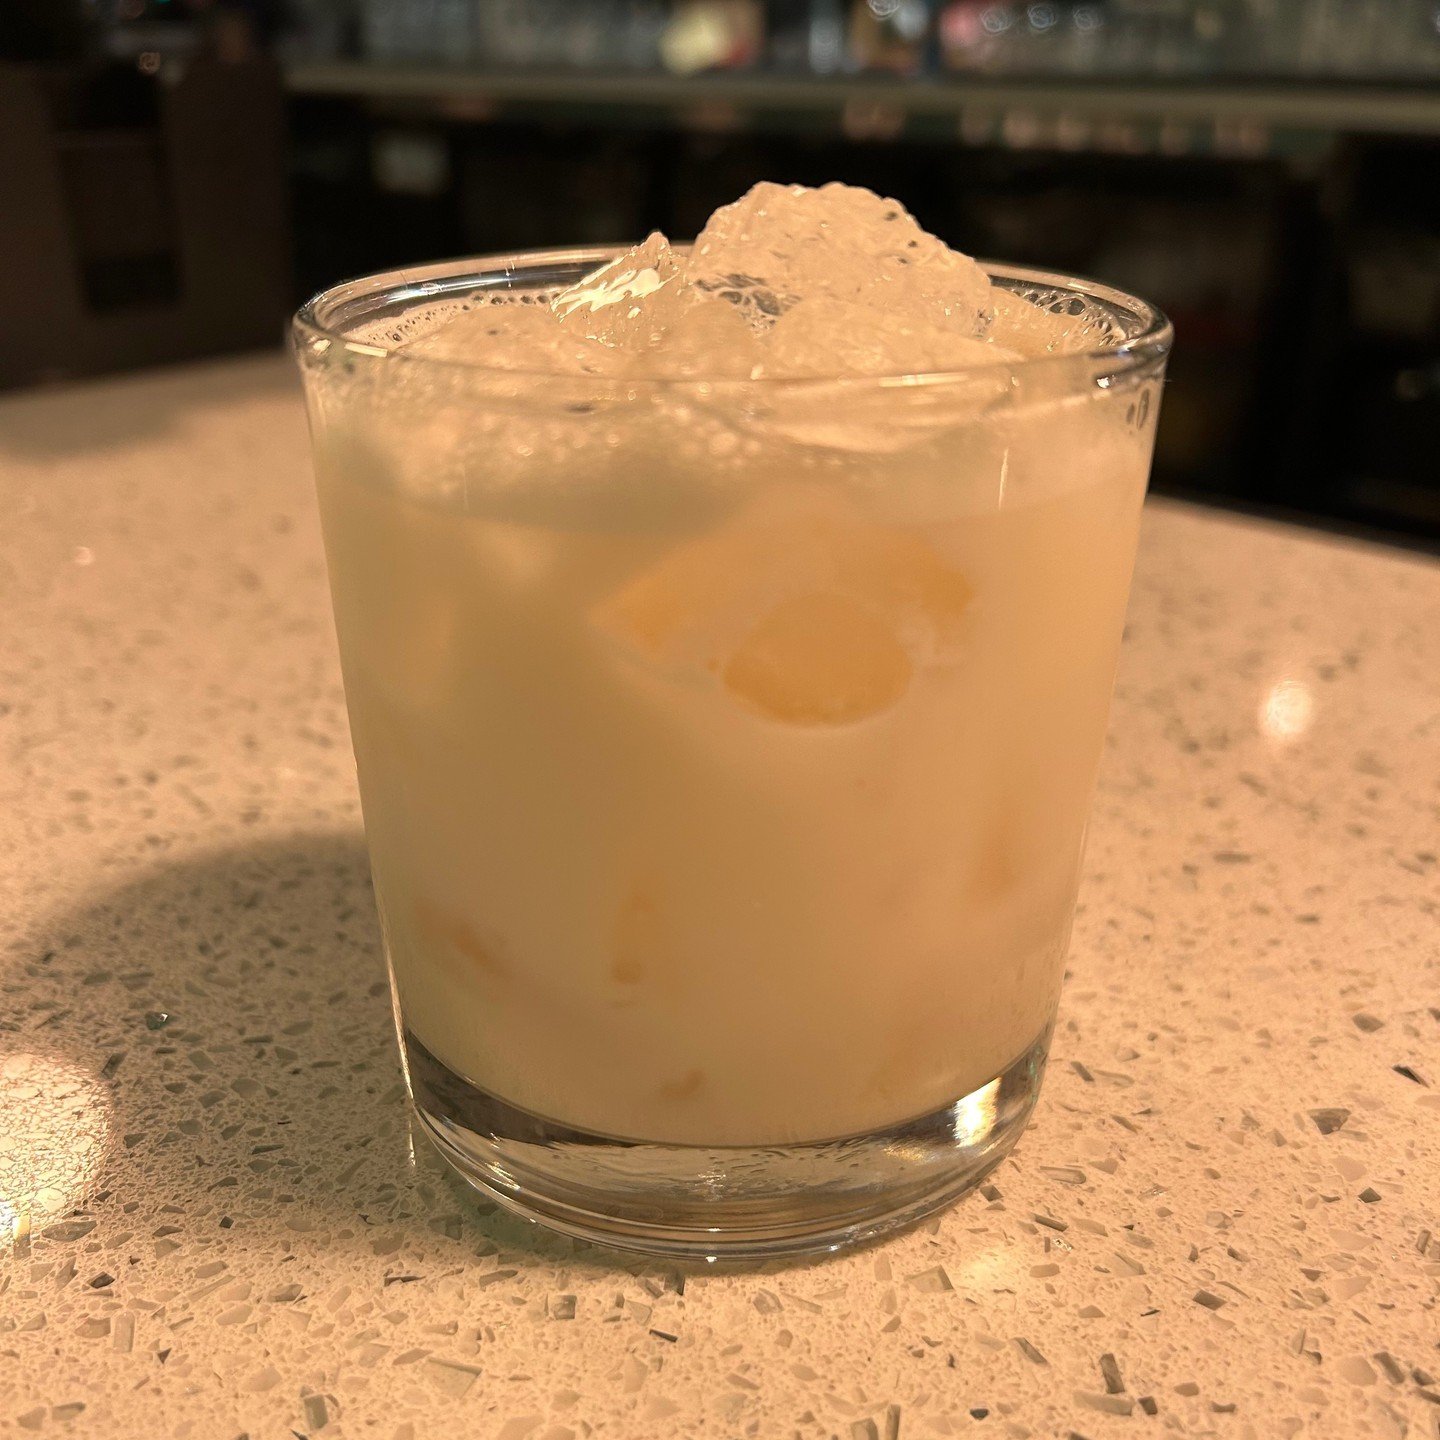 &ldquo;Fight milk! The first alcoholic dairy-based protein drink for bodyguards!&rdquo; - Mac

📸 - Fight Milk made with Jameson, Rumchata, Creme de Cacao, White Chocolate Liqueur